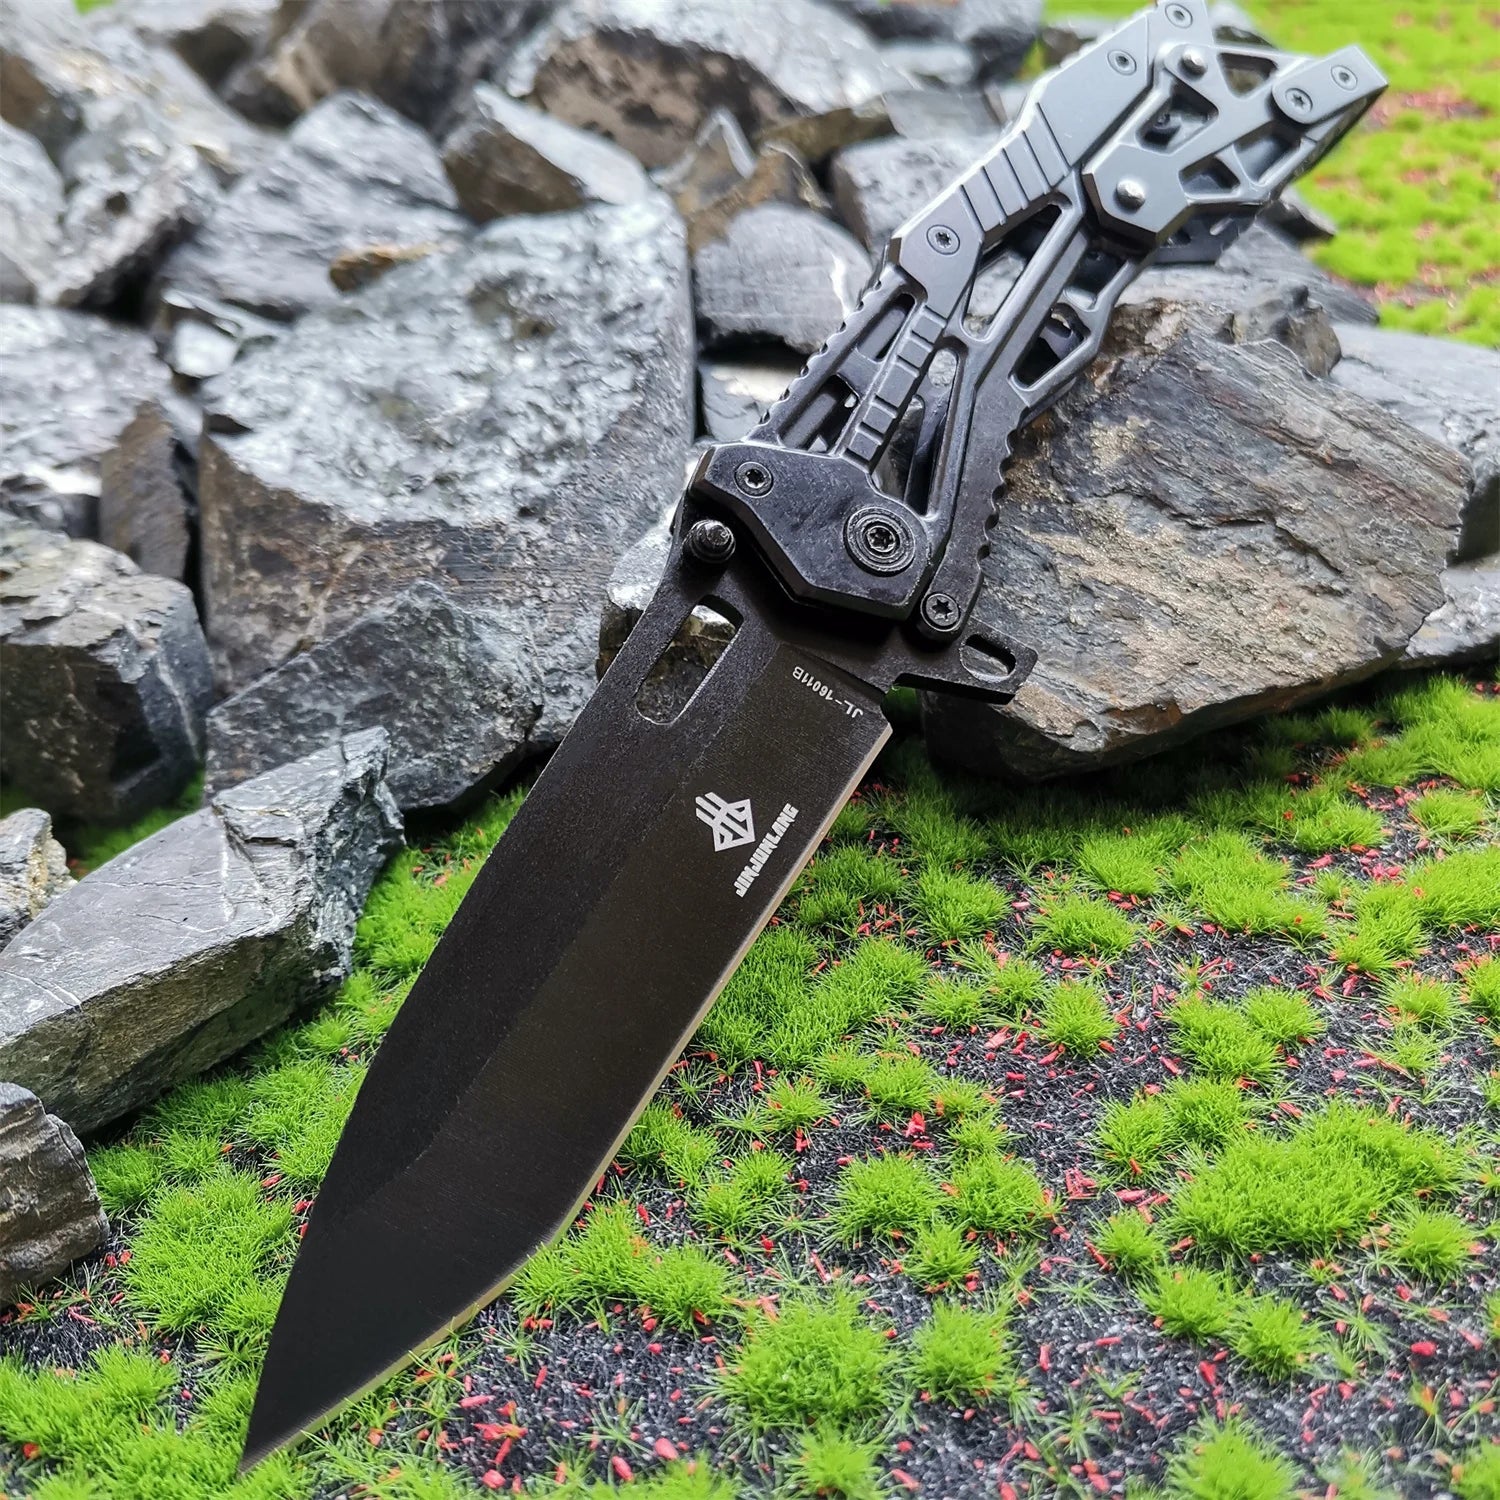 Professional Folding Pocket Knife: Ideal for Outdoor Camping, Hunting